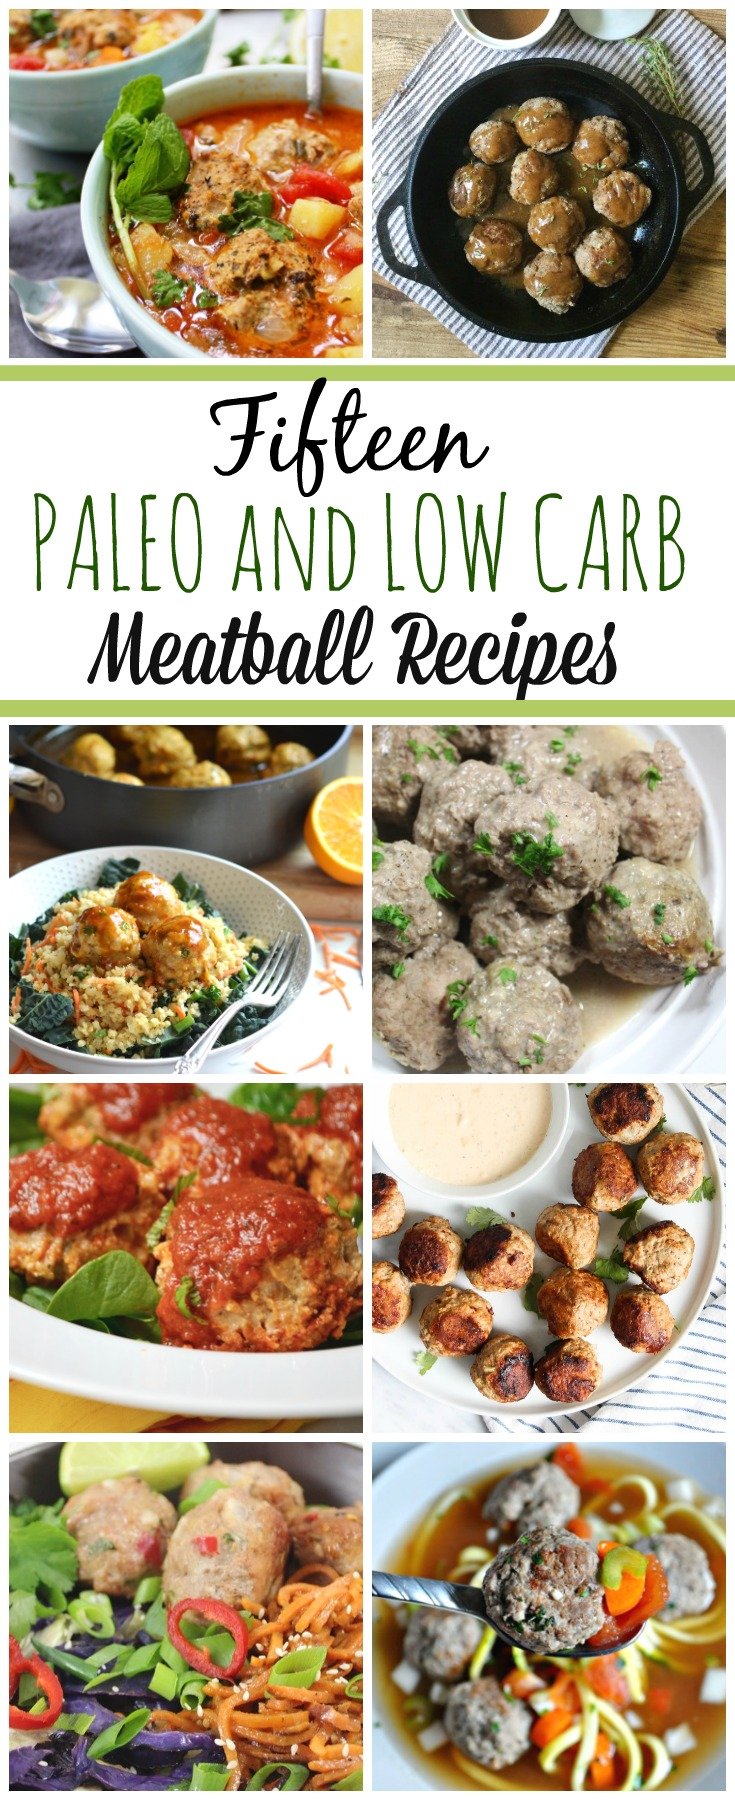 Paleo meatball recipes that are easy to make. These healthy meatball recipes are all perfect for meal prep, family friendly and freezer friendly, and Whole30 compliant! #paleomeatballs #paleodinner #paleobeefrecipes